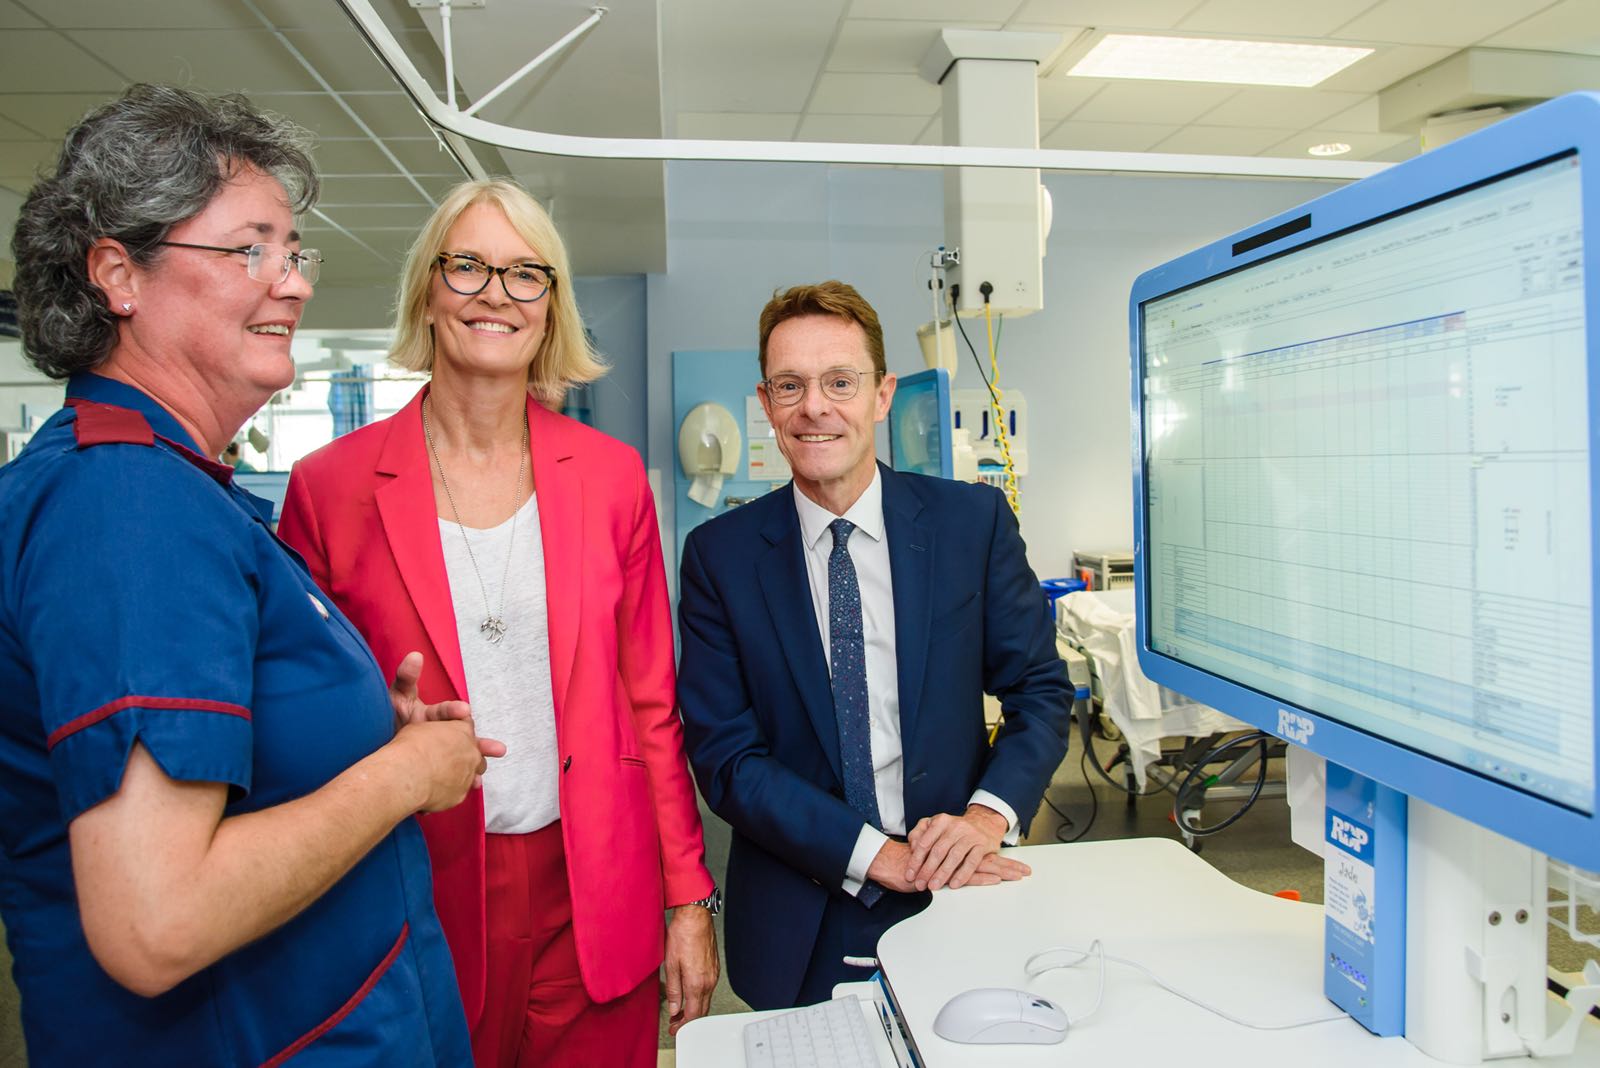 Helen Gyves (left), lead nurse for Clinical IT at Birmingham's Queen Elizabeth Hospital explains to Minister for Digital, Margot James and Mayor of the West Midlands Andy Street how 5G technology will enable outpatient appointments to be carried out remotely